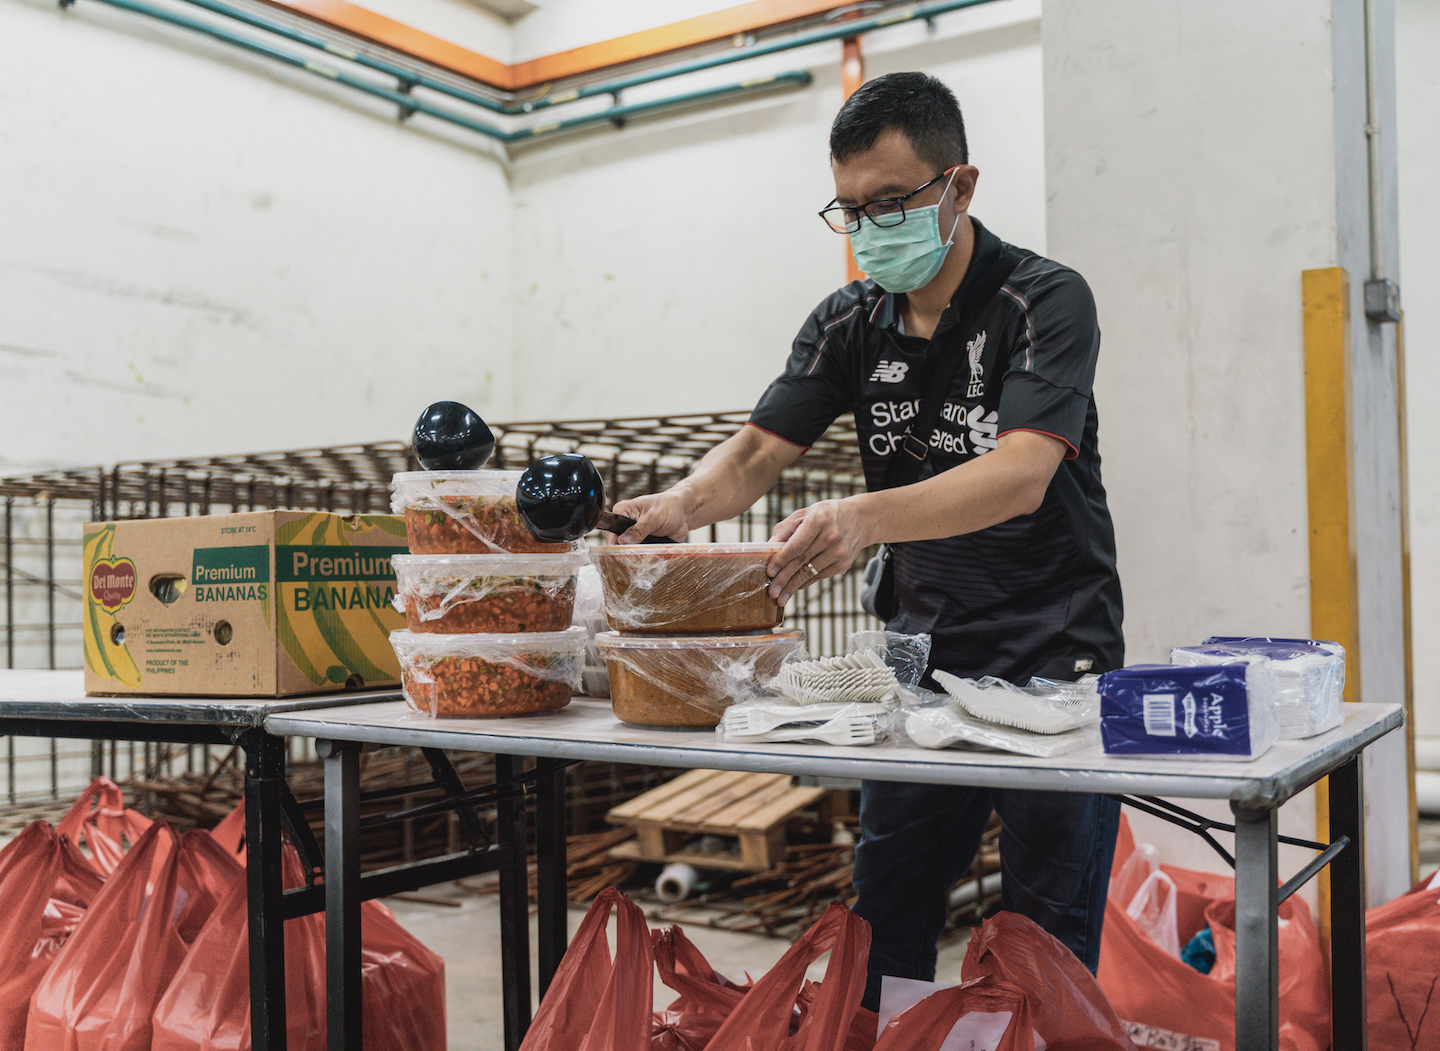 "We heard caterers were going through a hard time as well and business had dropped drastically," says Ps Lim. He hopes that by doing business with caterers as the church goes about to minister to those in need, that they can benefit as well.